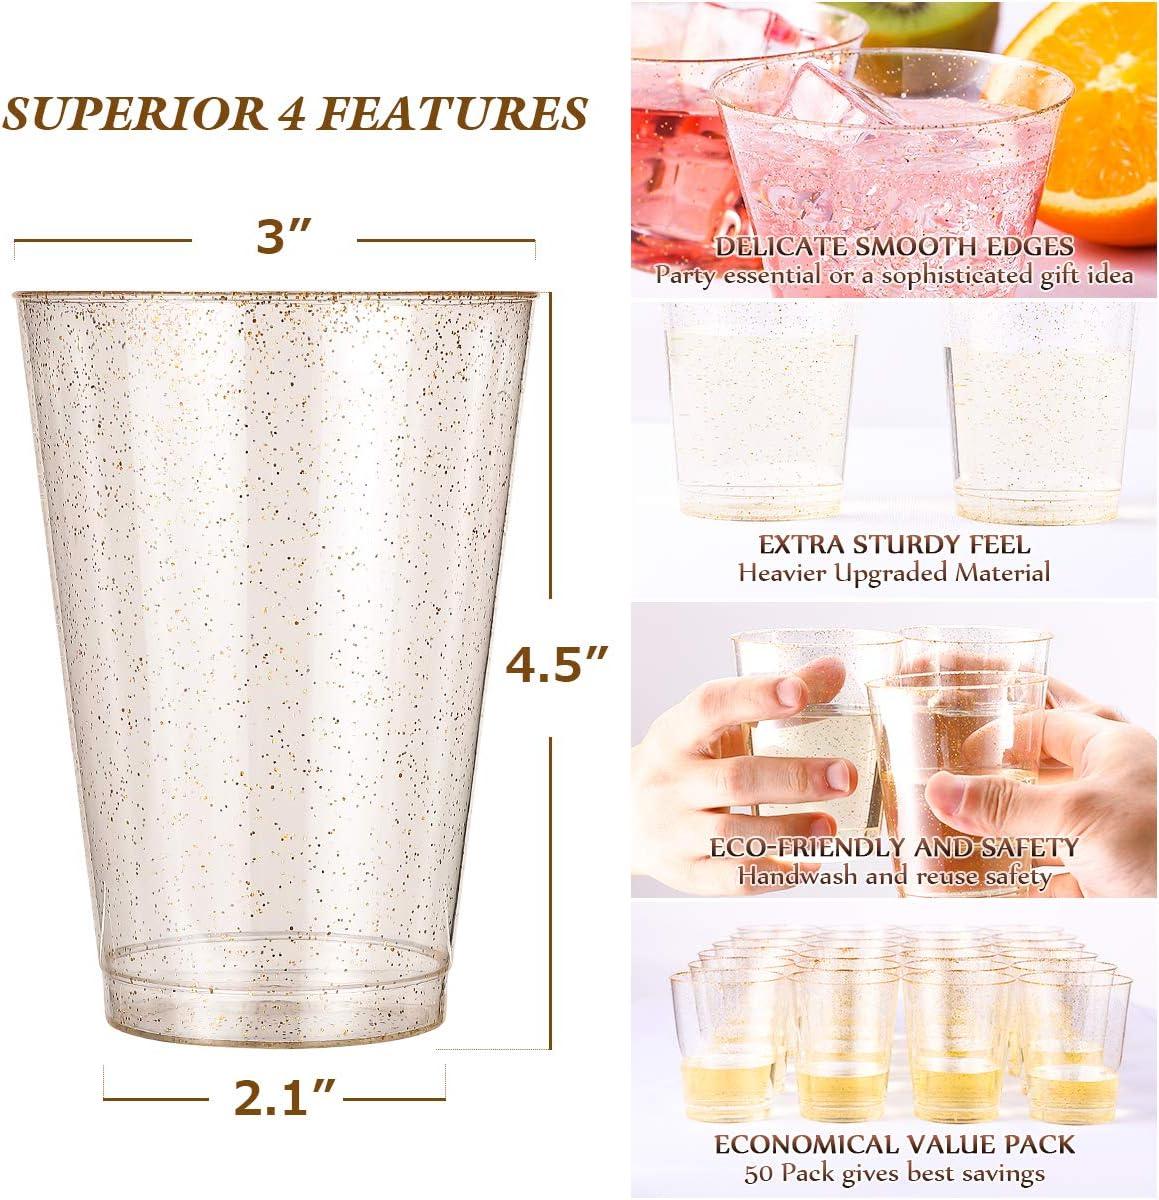 Exquisite 120 Count 10 oz Gold Glitter Clear Plastic Cups Tumblers - Hard Plastic Disposable Cups for Wedding Glasses - Plastic Party Cups for